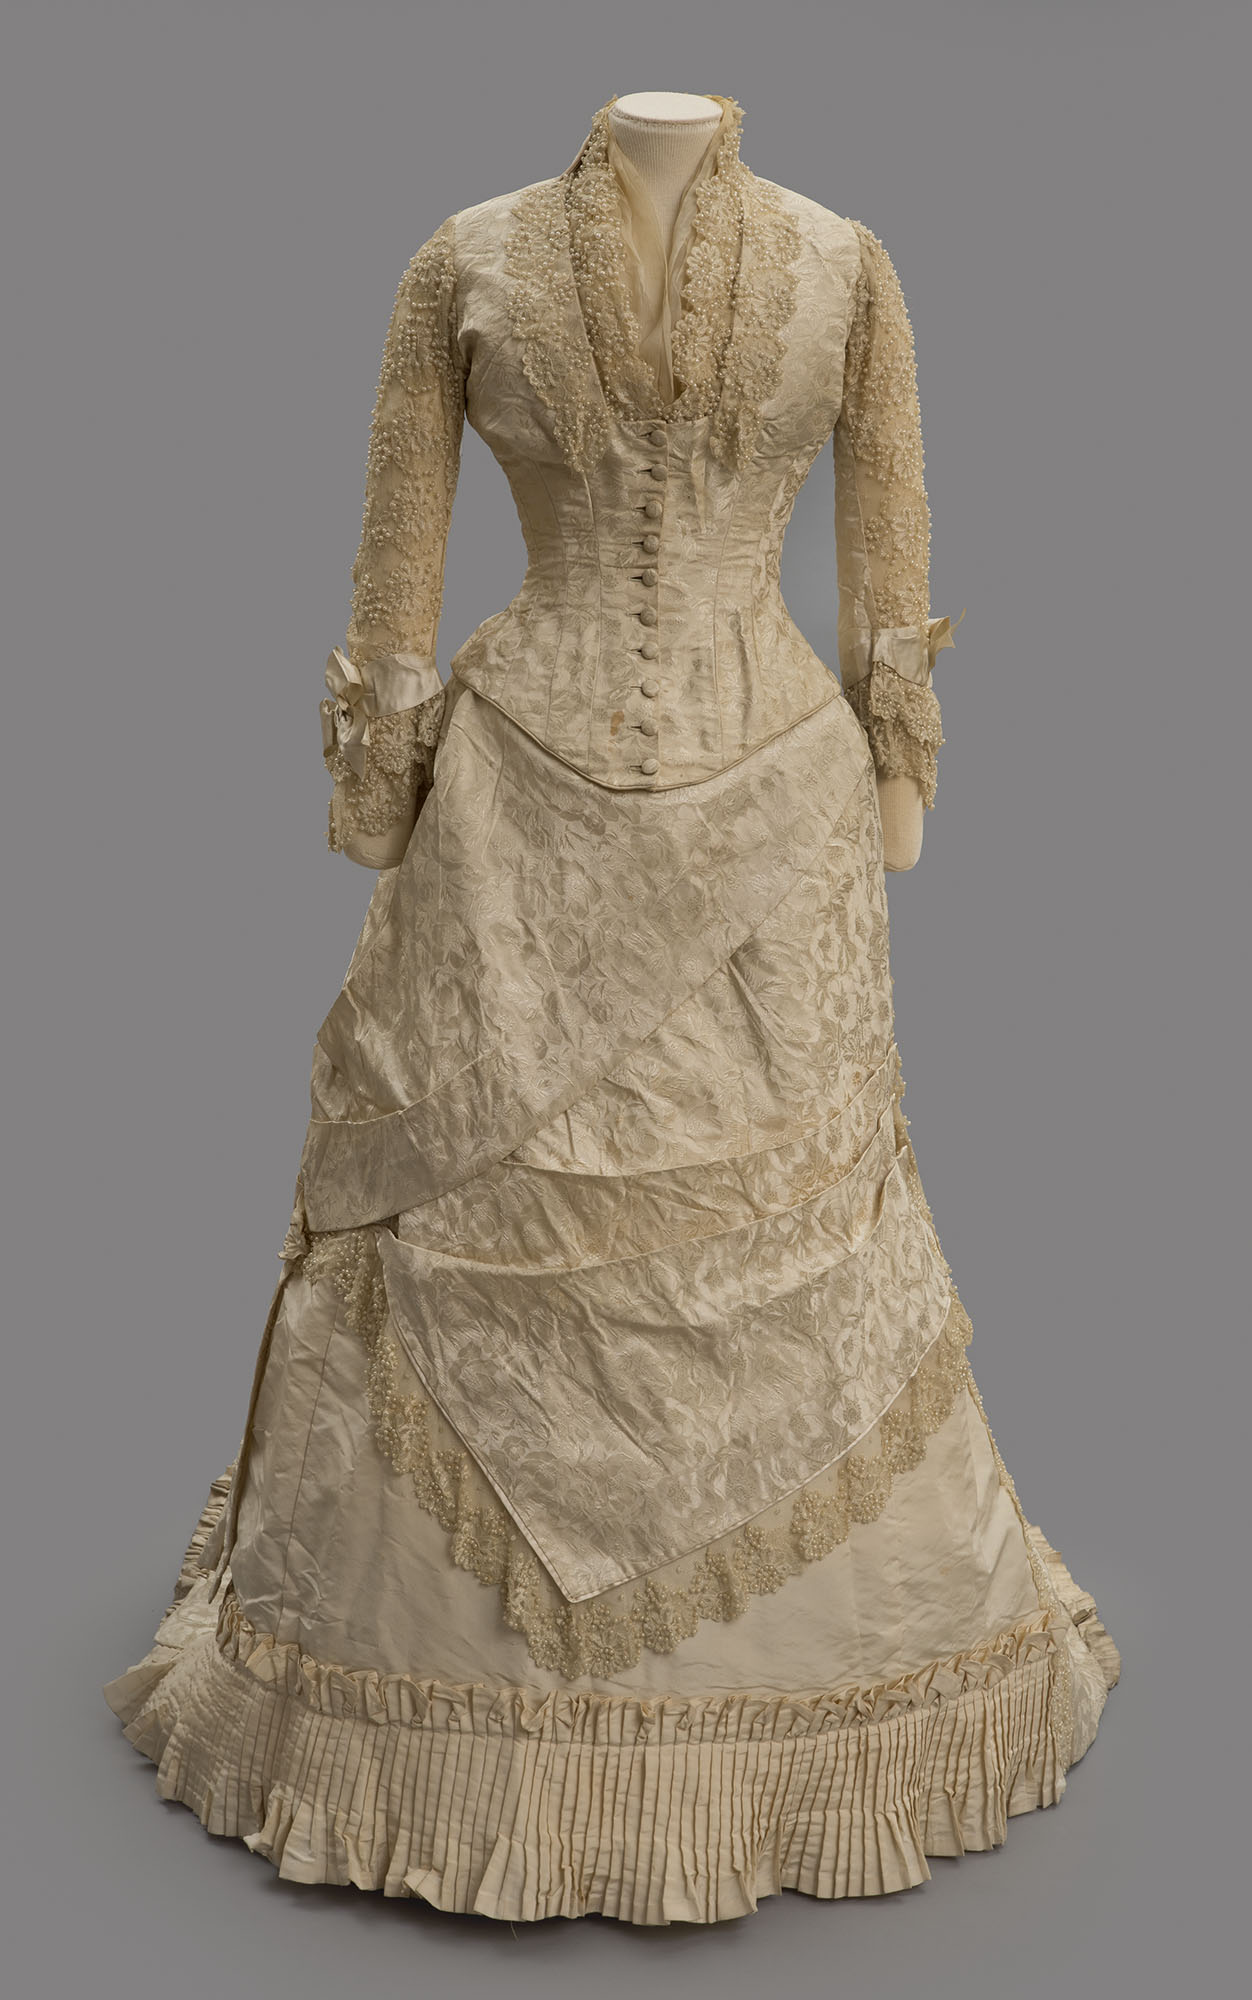 White Dinner Dress with Lace and Pearls - Albany Institute of History ...